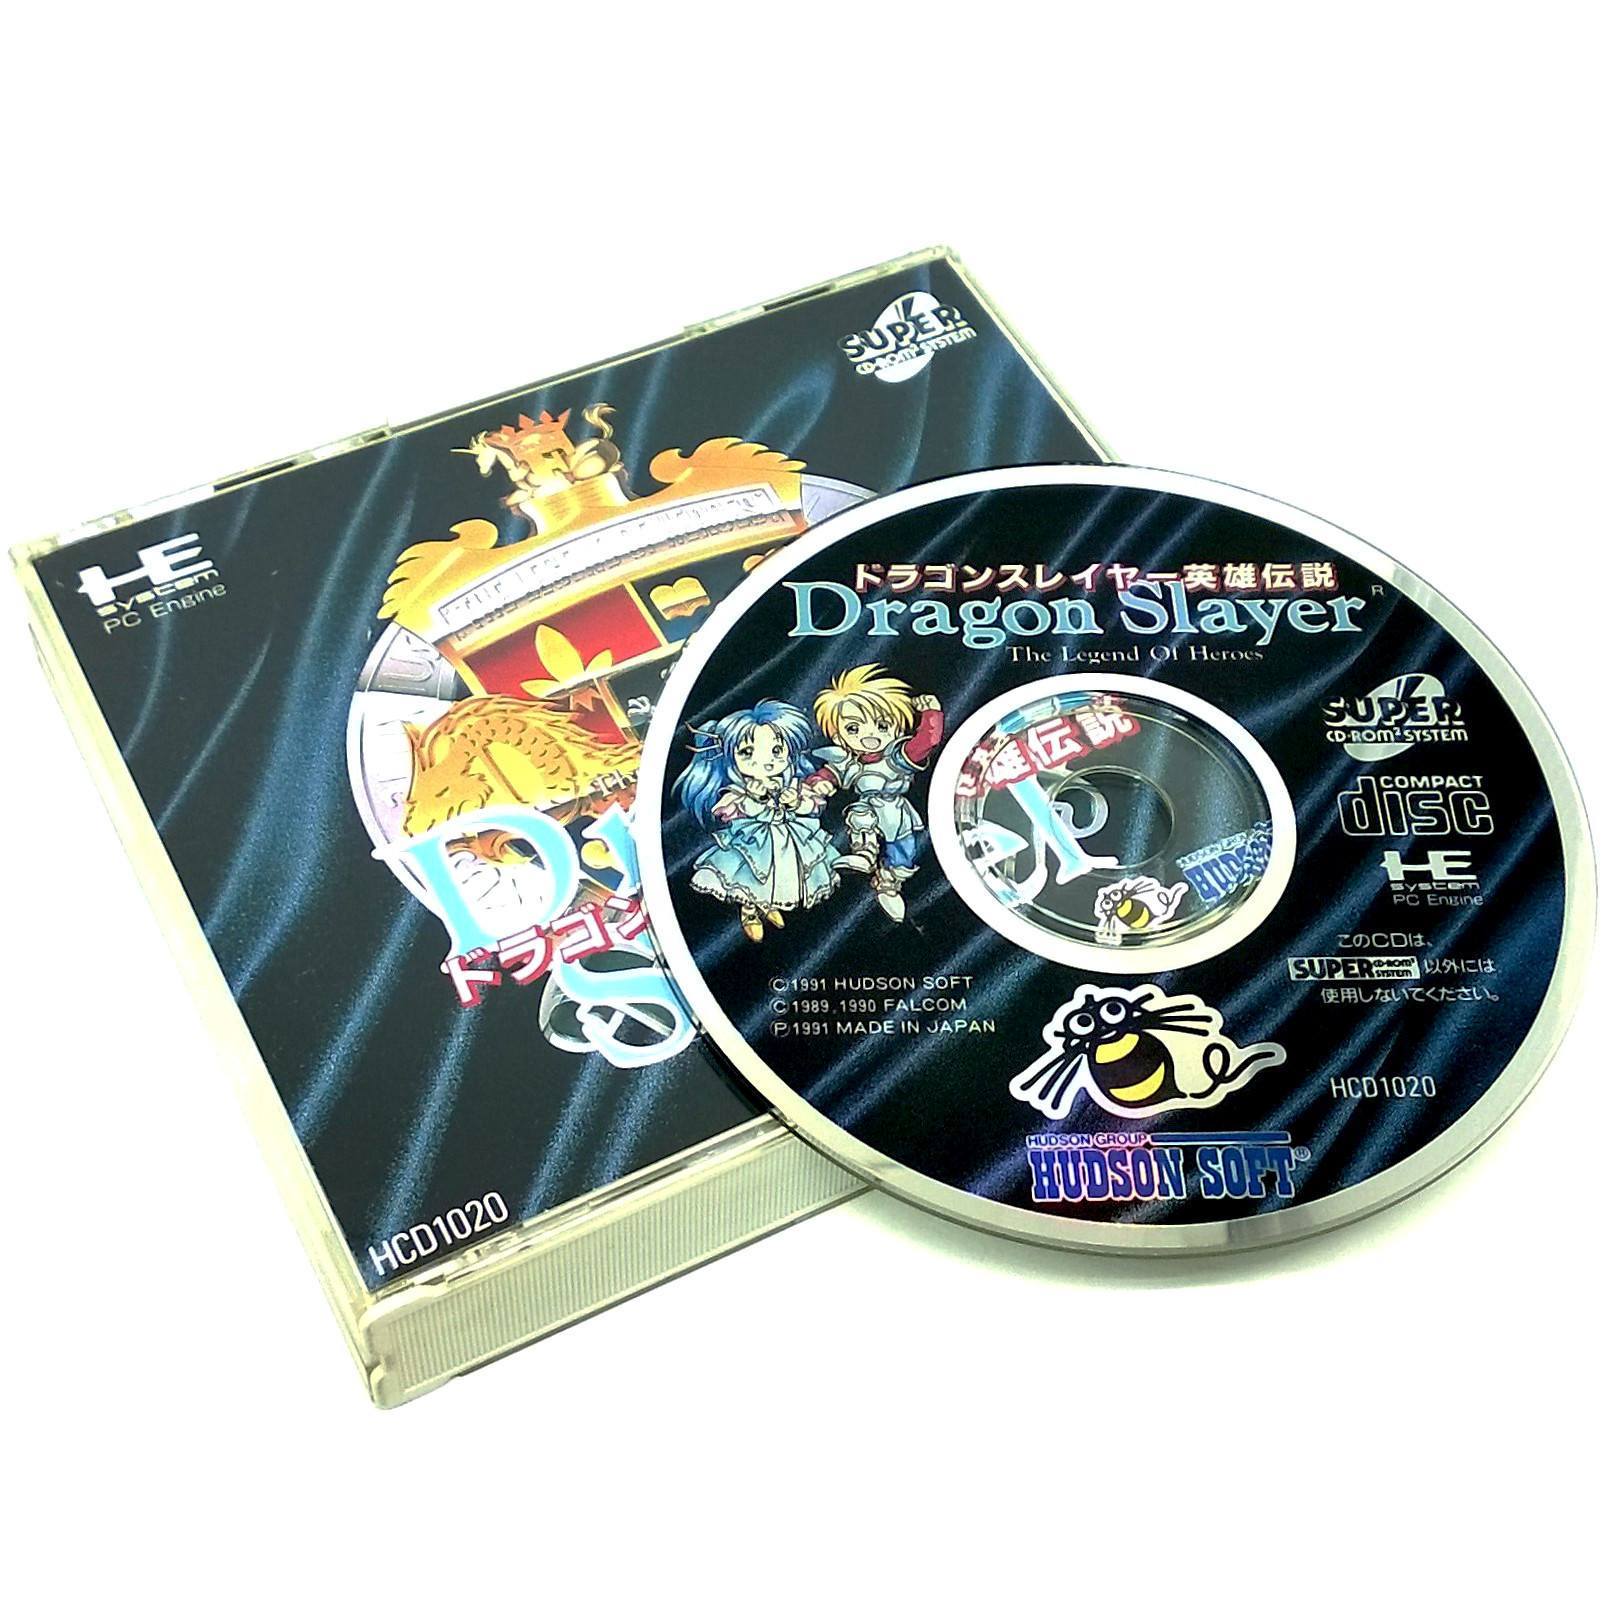 Dragon Slayer: The Legend of Heroes for PC Engine